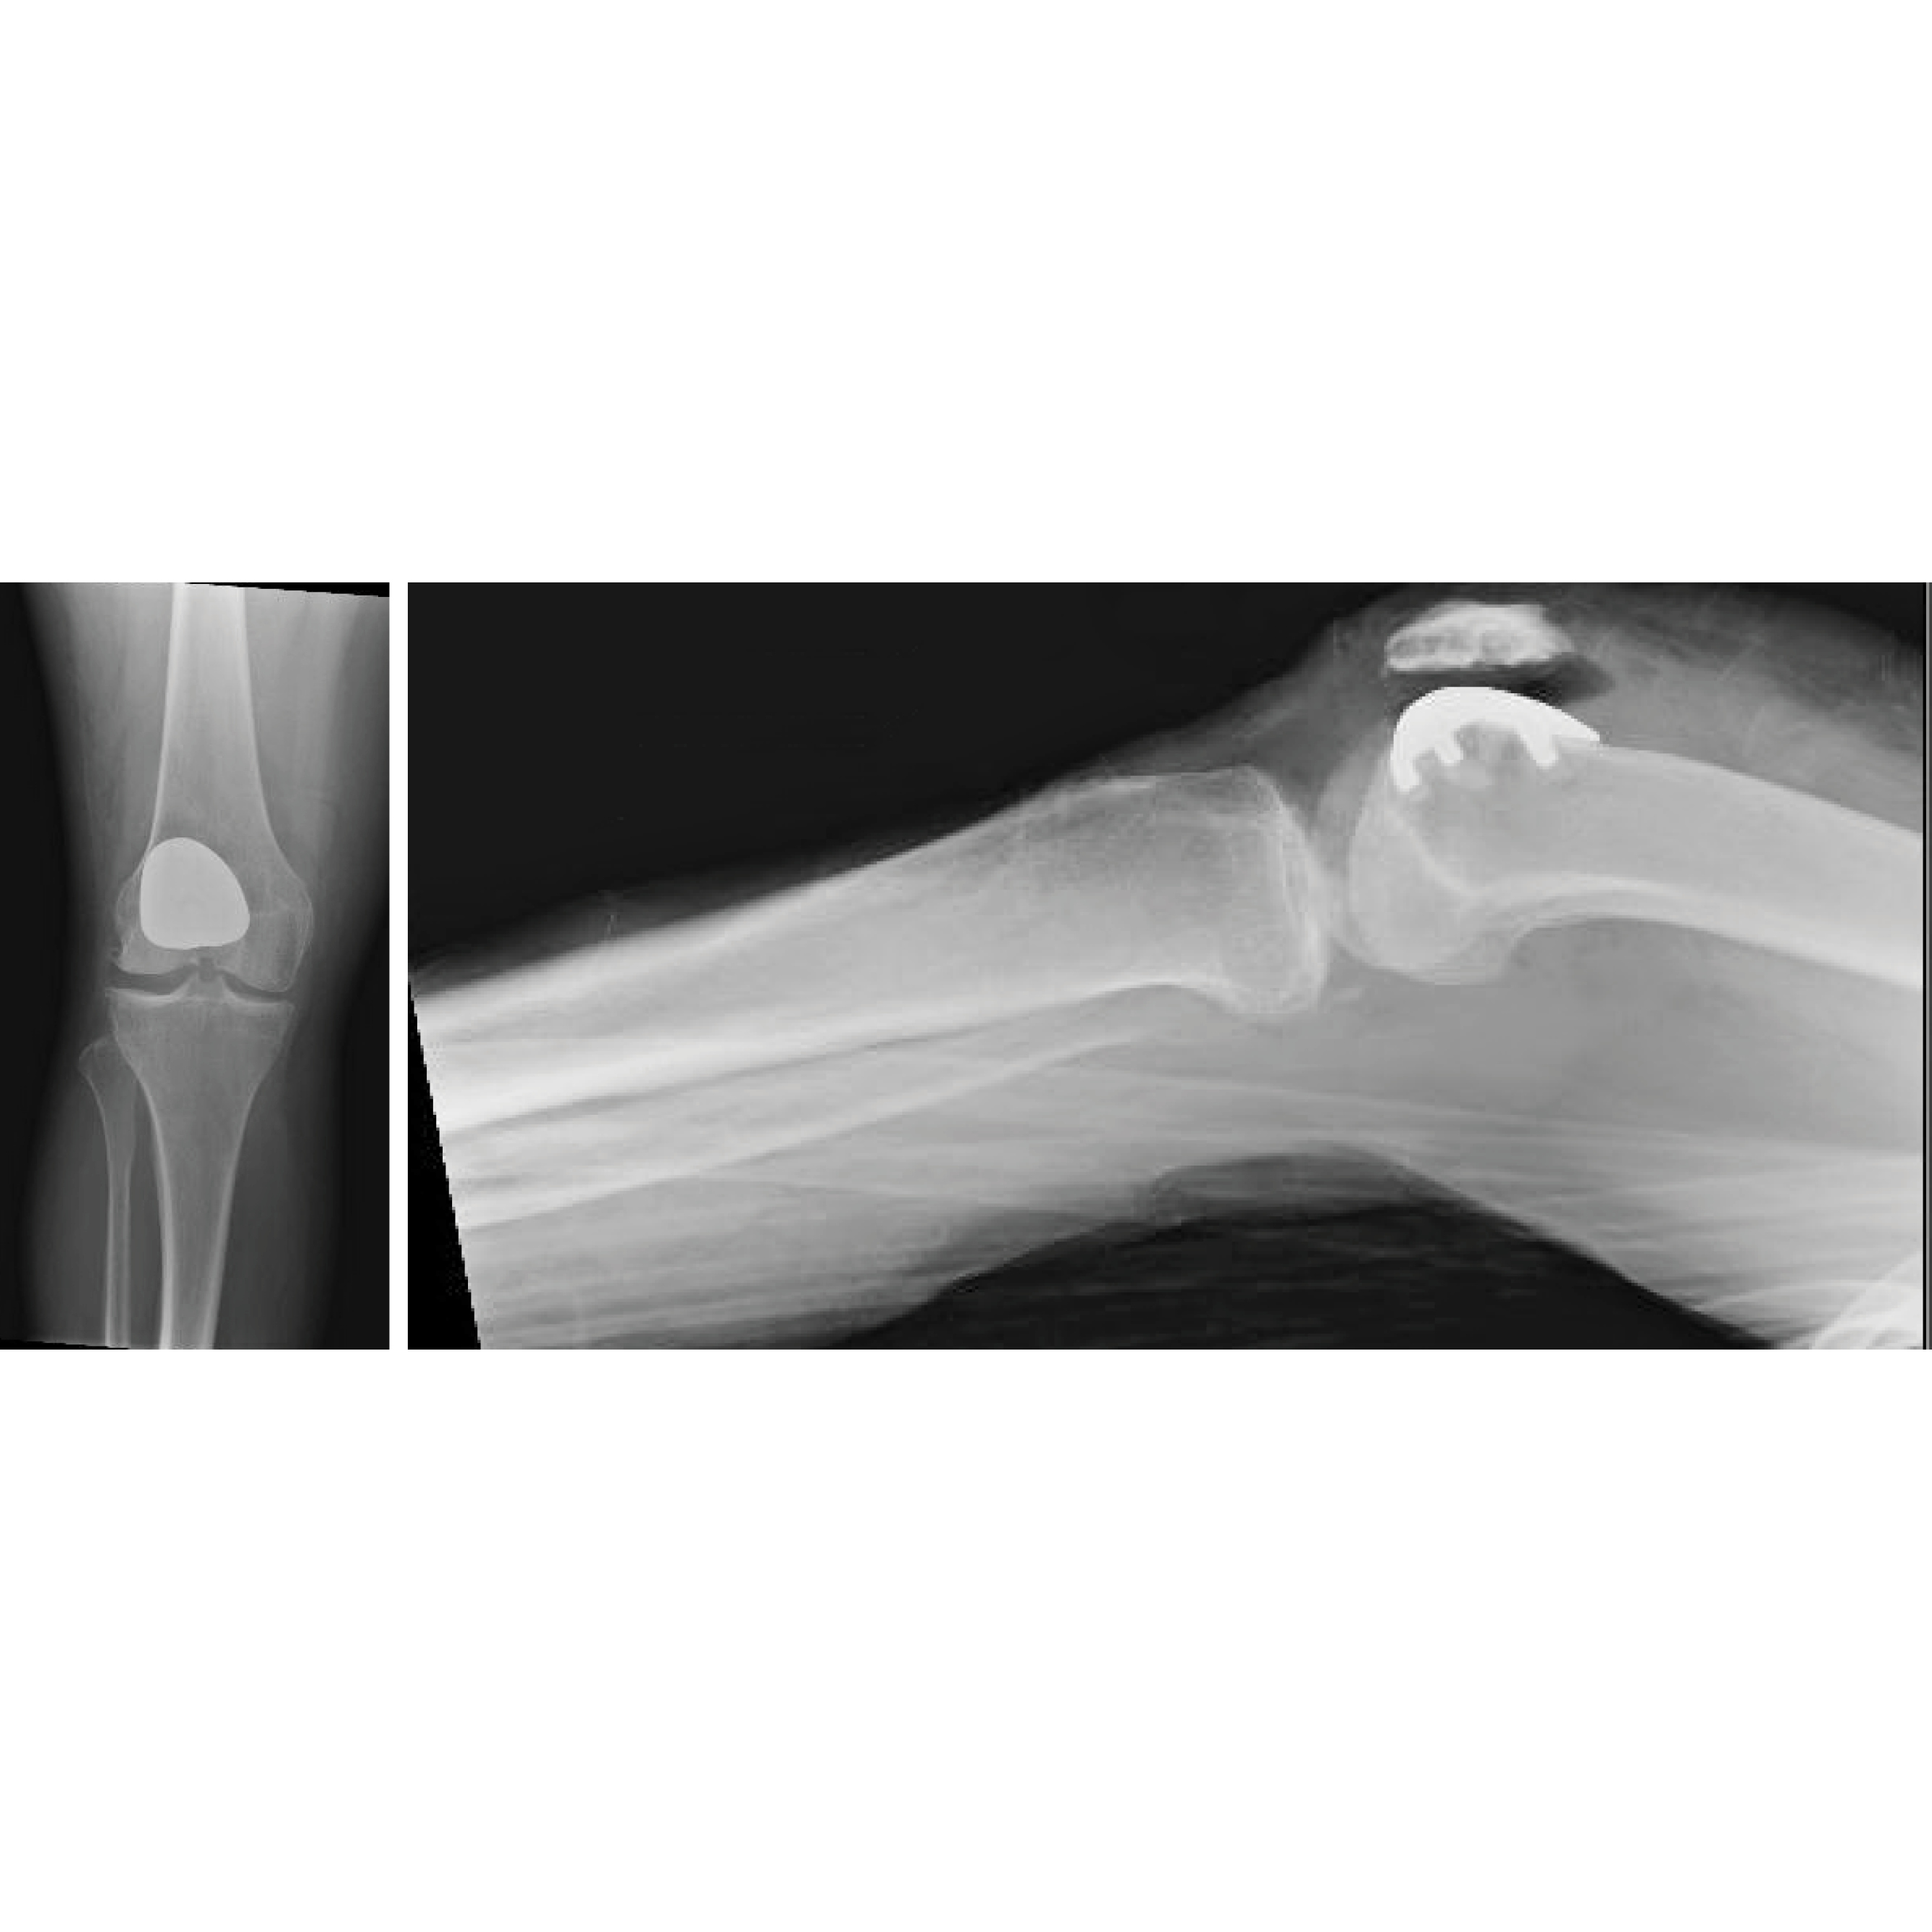 X-rays show a 55-year-old patient who underwent patellofemoral arthroplasty for isolated patellofemoral arthritis.